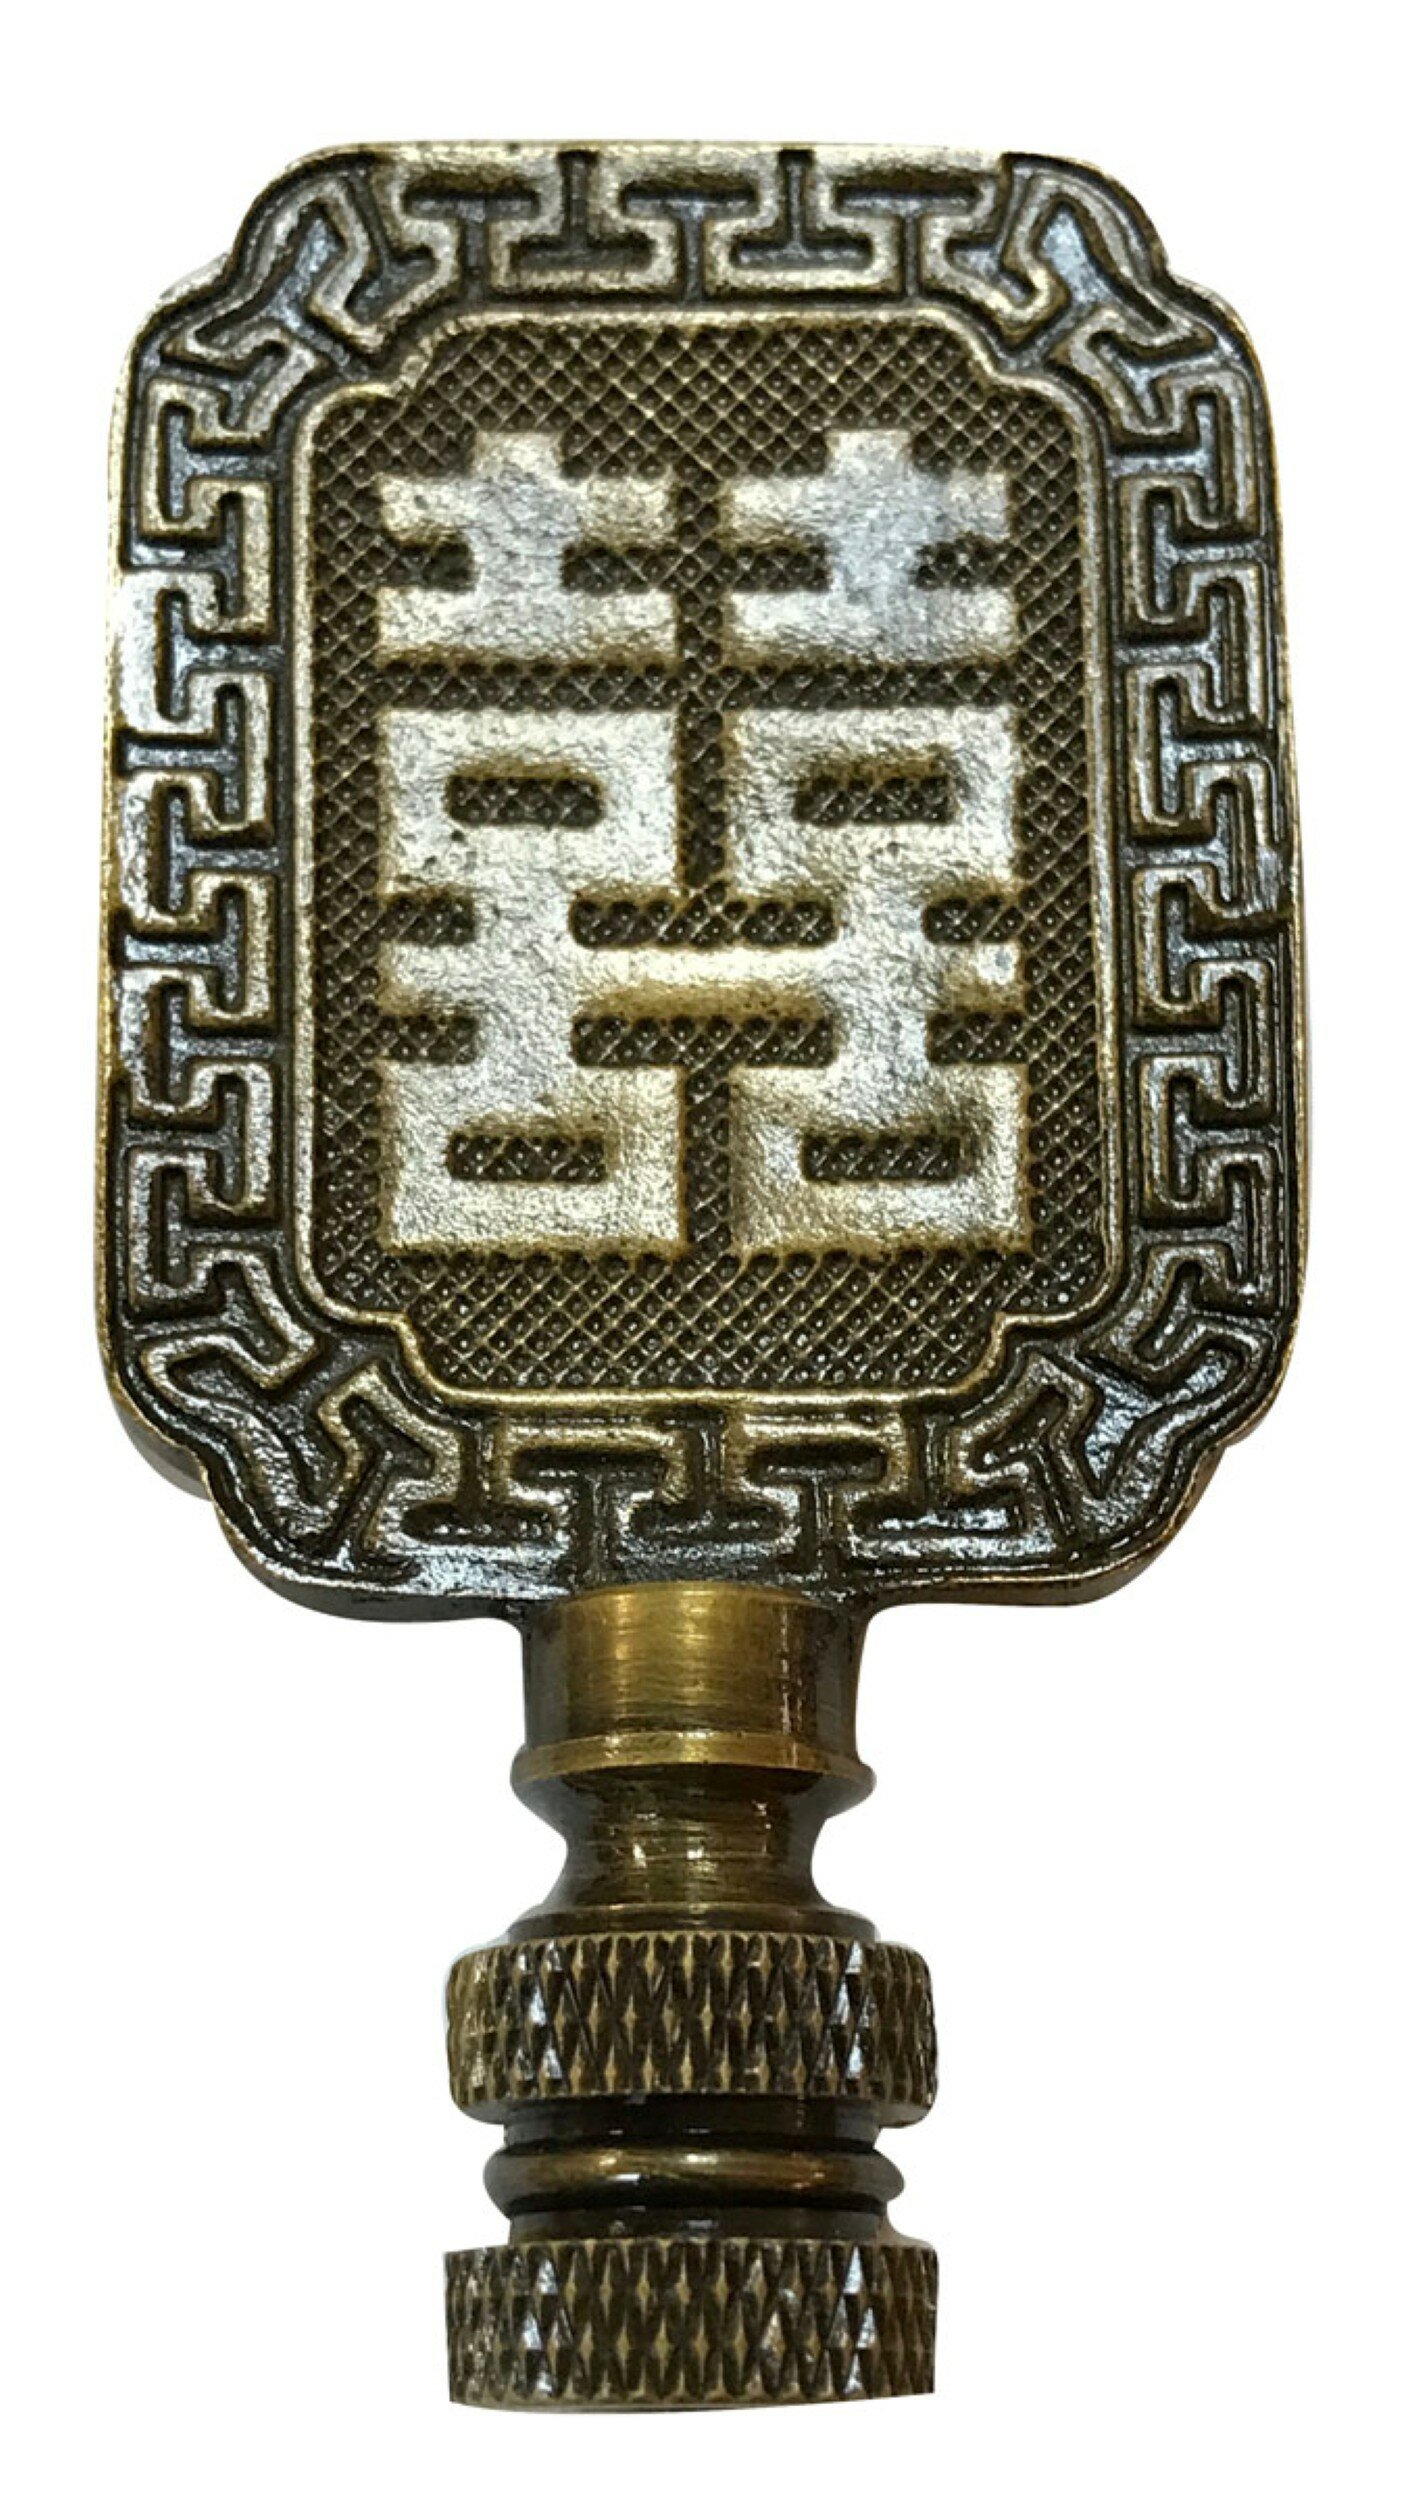 Fu Symbol Chinese Good Fortune Symbol Carved Stone Lamp Finial Iron Red on Coppered Bronze Tone Hardware